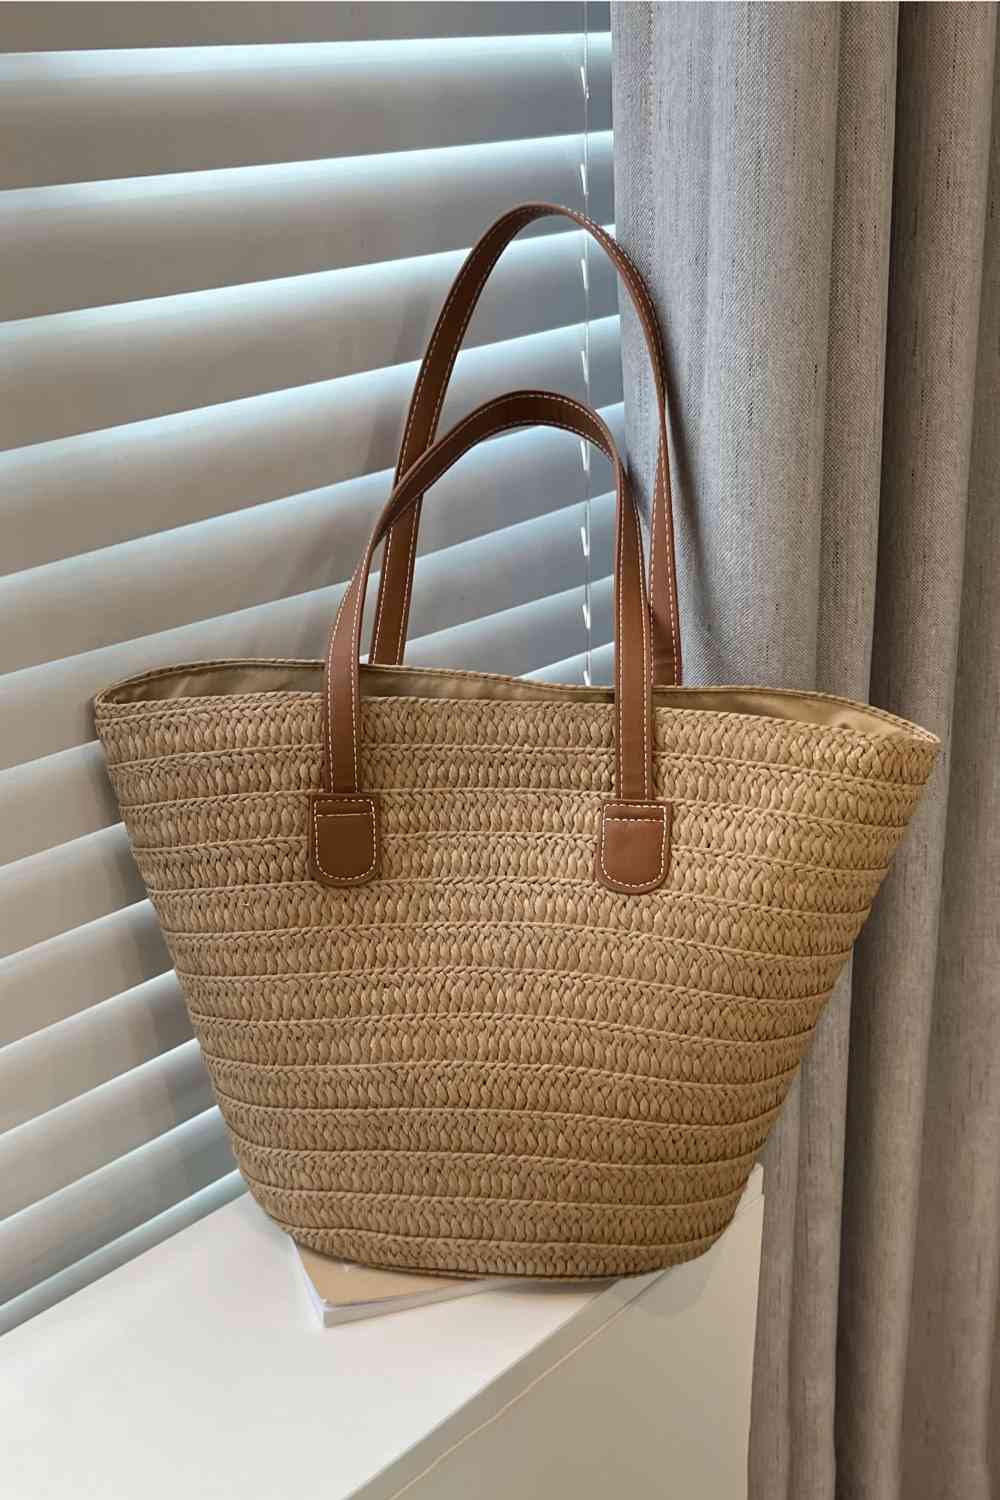 PU Leather Handle Straw Tote Bag-Ship From Overseas, Y.P-Camel-One Size-[option4]-[option5]-[option6]-Womens-USA-Clothing-Boutique-Shop-Online-Clothes Minded